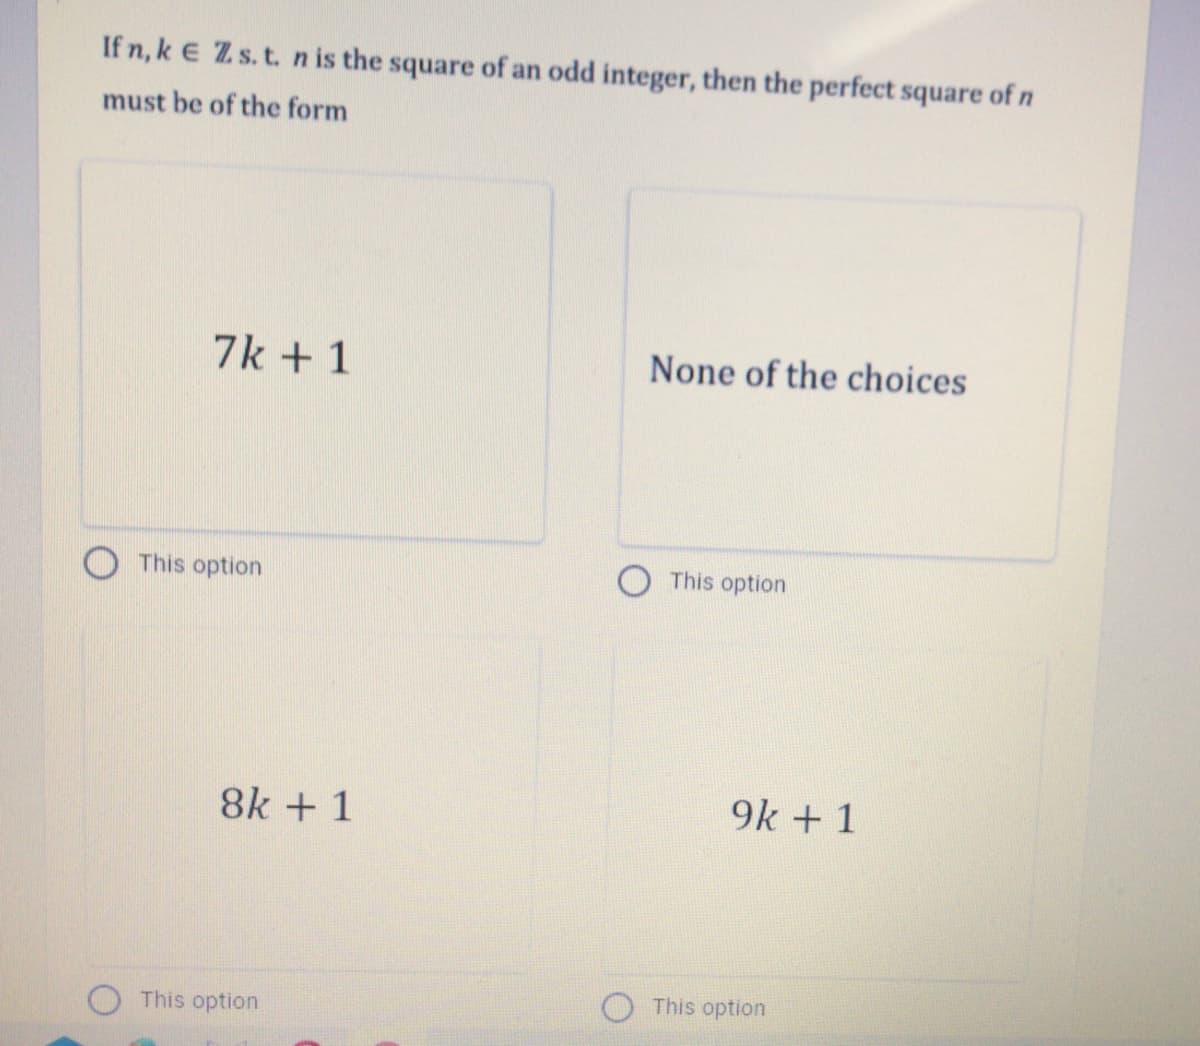 If n, k E Z s. t. n is the square of an odd integer, then the perfect square of n
must be of the form
7k + 1
None of the choices
This option
This option
8k + 1
9k + 1
This option
This option
